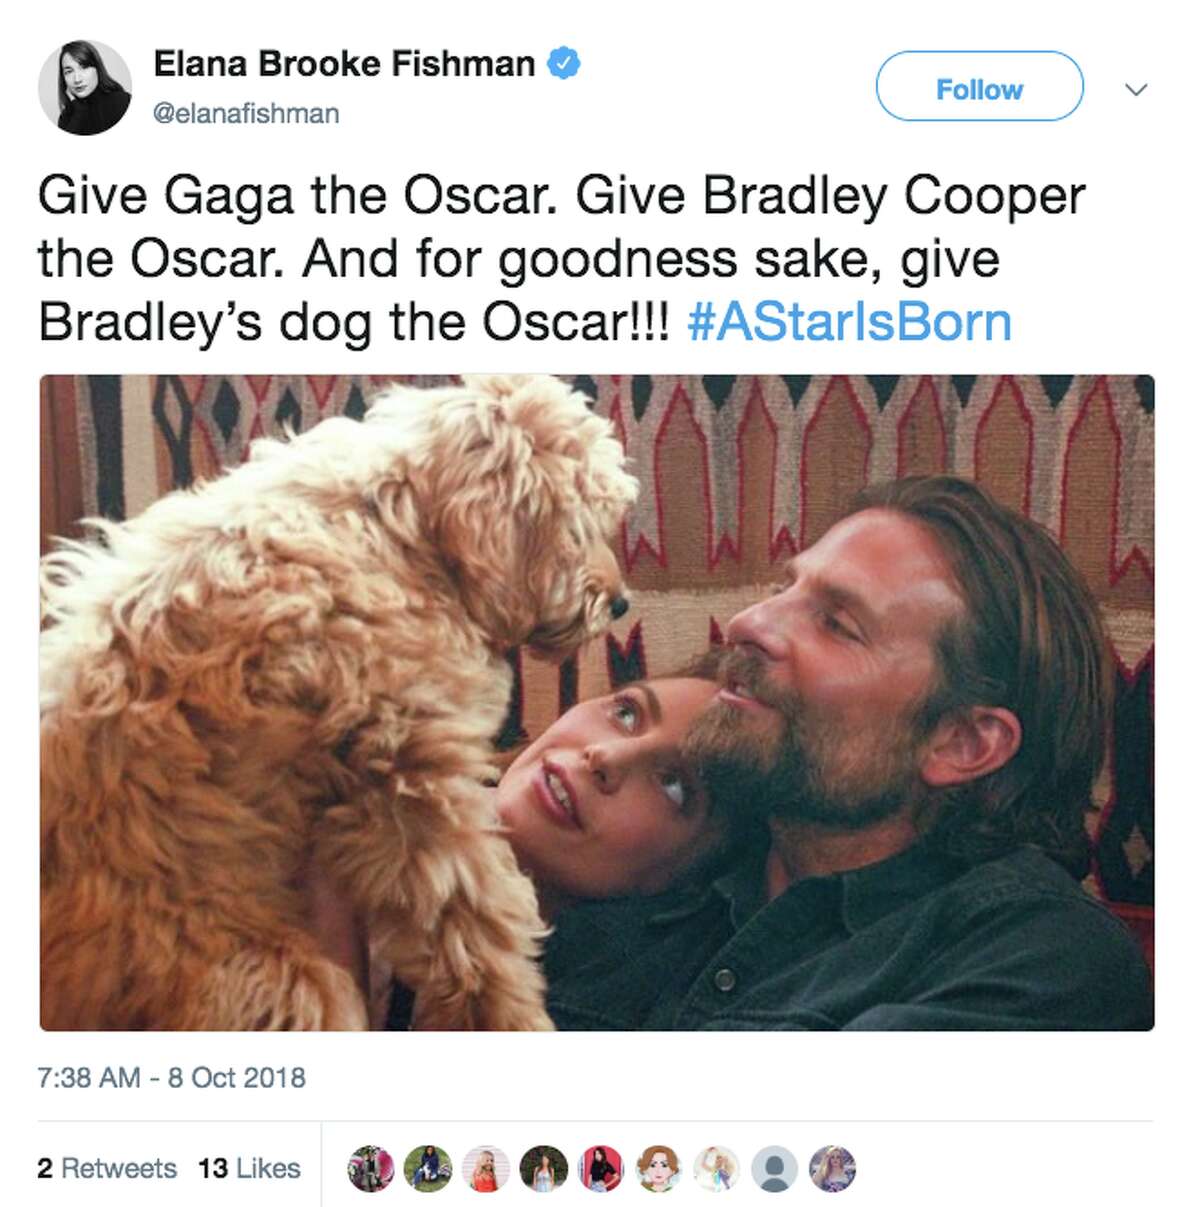 What breed is Bradley adorable dog in 'A Star is Born?'